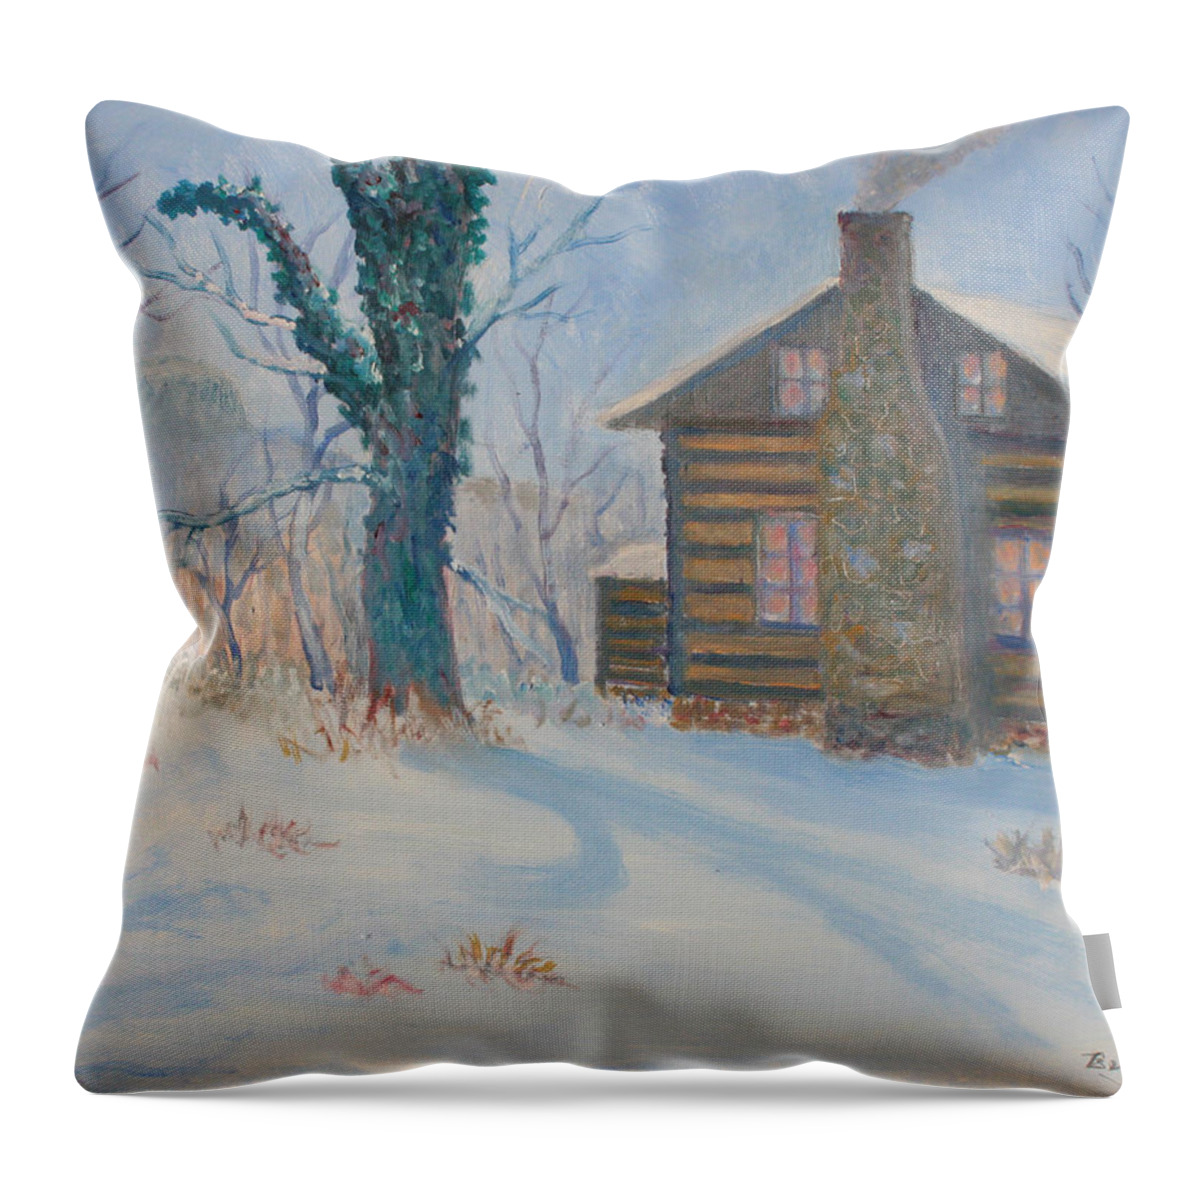 Pilot Mountain Throw Pillow featuring the painting Pilot Mountain Lodge by Ben Kiger